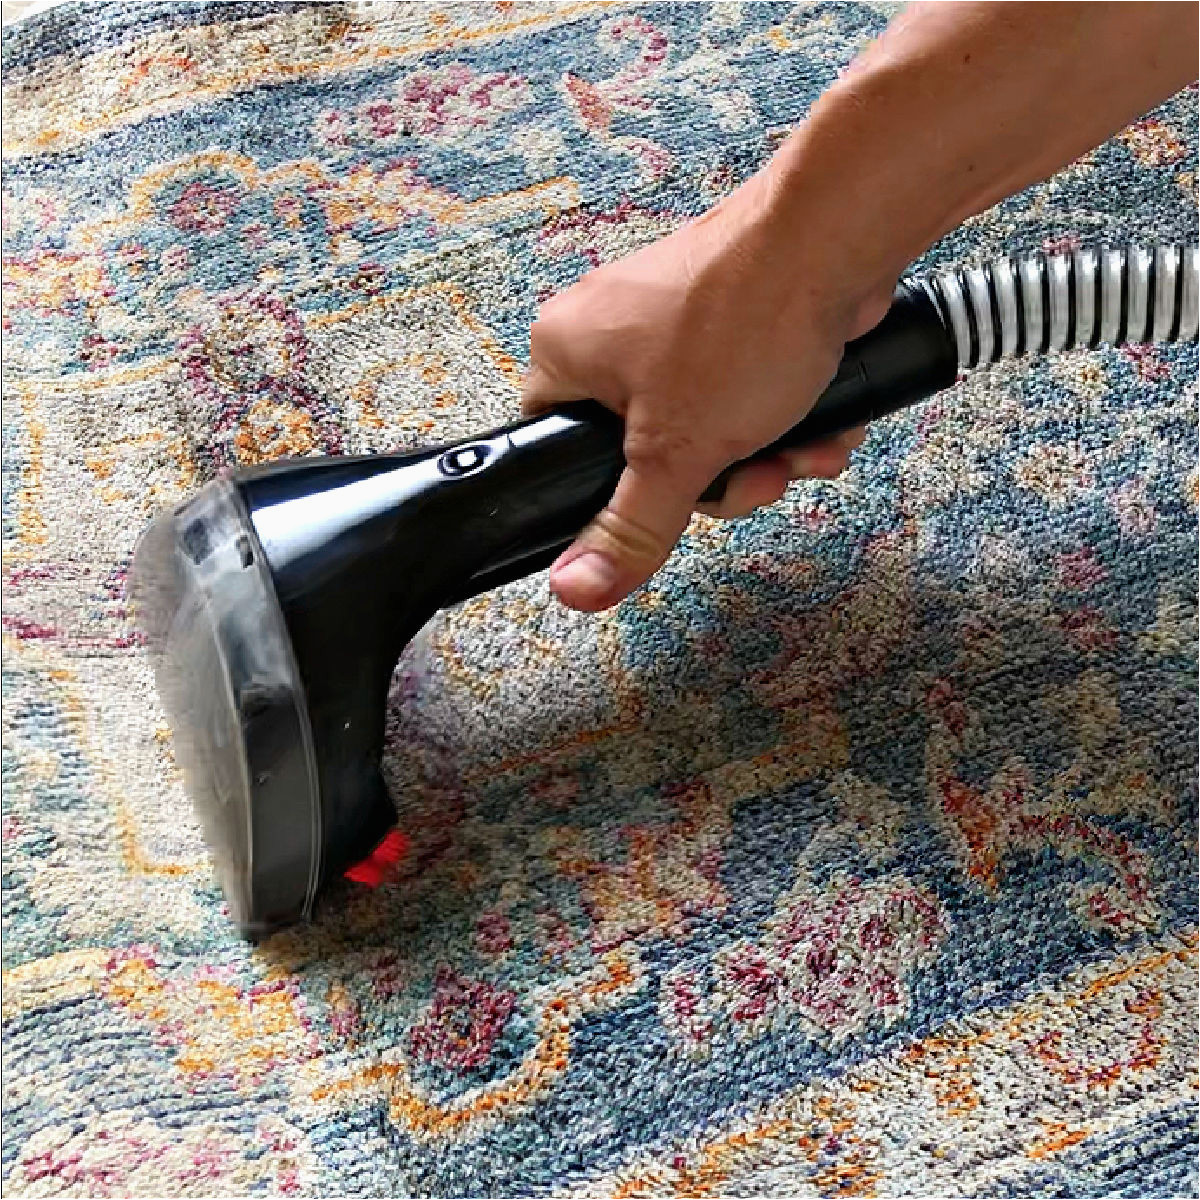 Can You Steam Clean area Rugs On Hardwood Floors How to Clean area Rugs at Home: Easy Guide & Video – Abbotts at Home